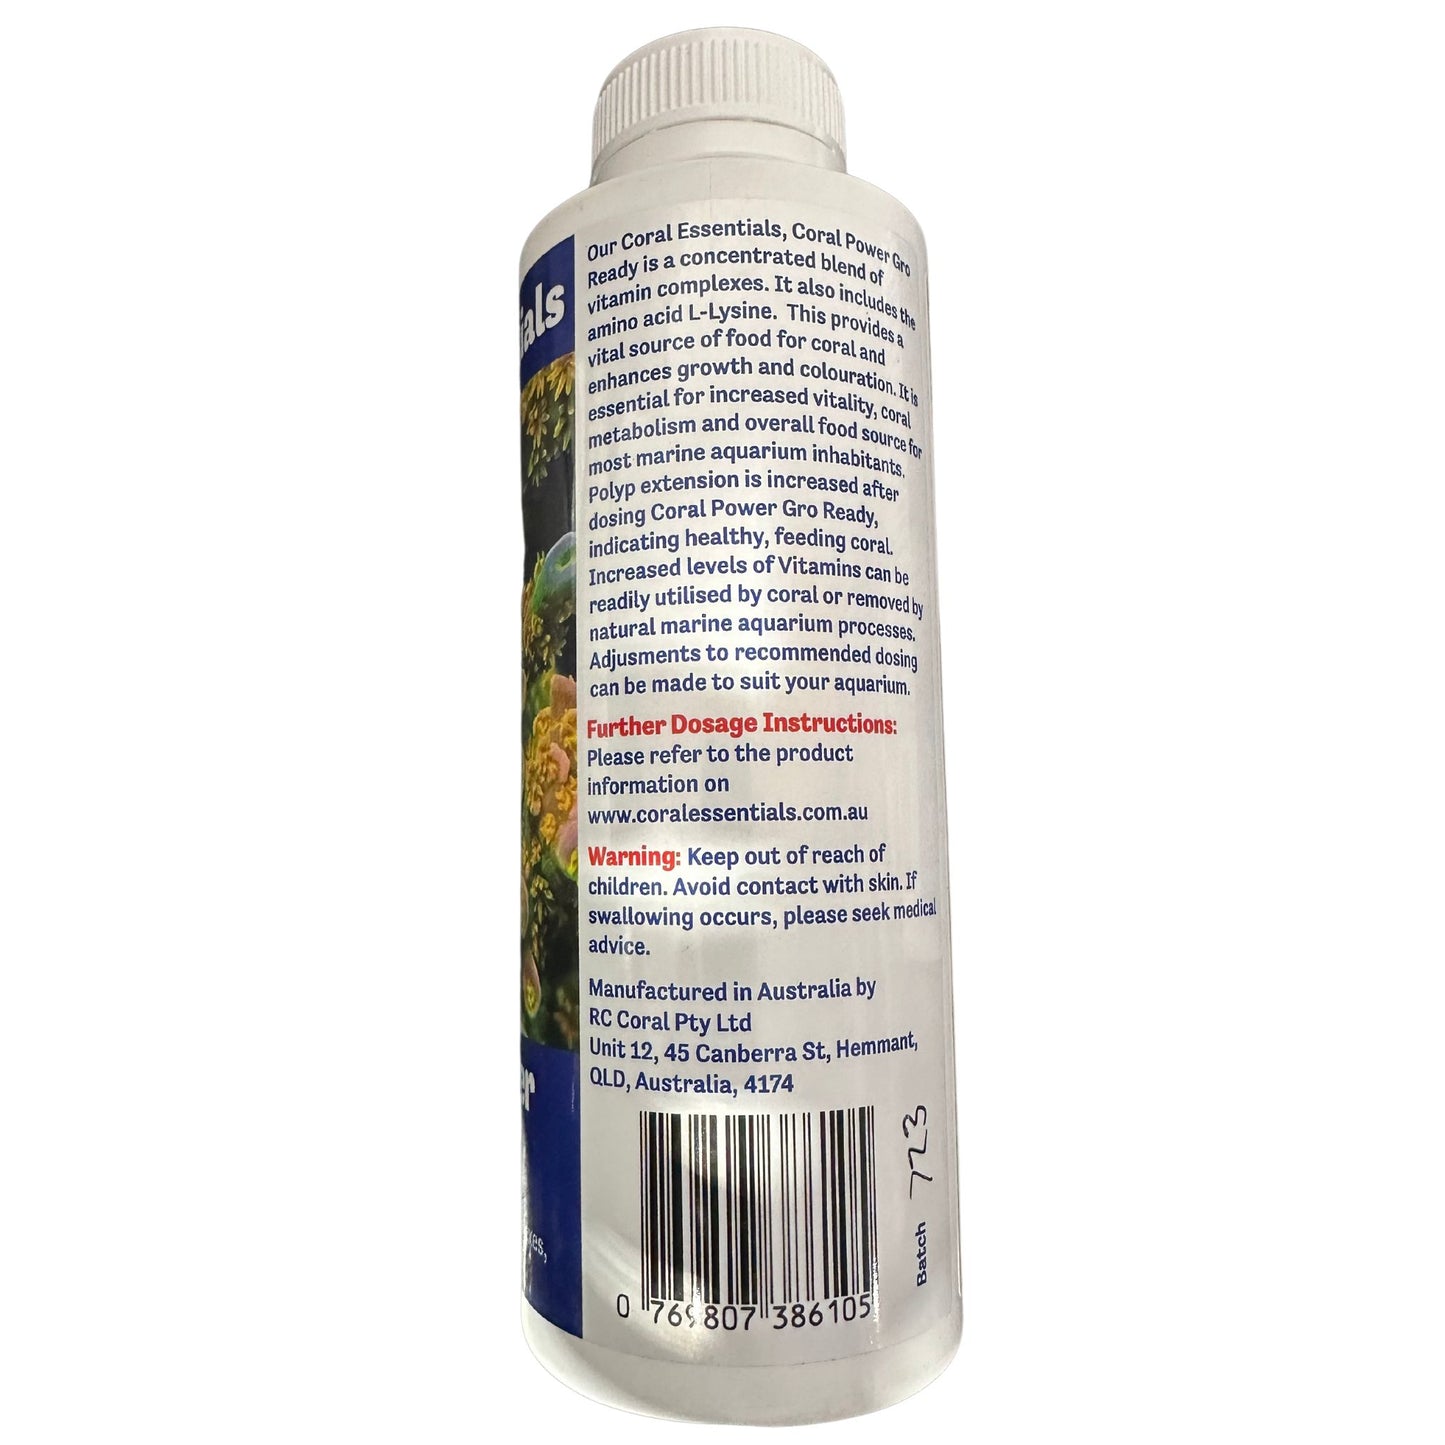 Coral Power Gro Ready 500ml - Coral Essentials